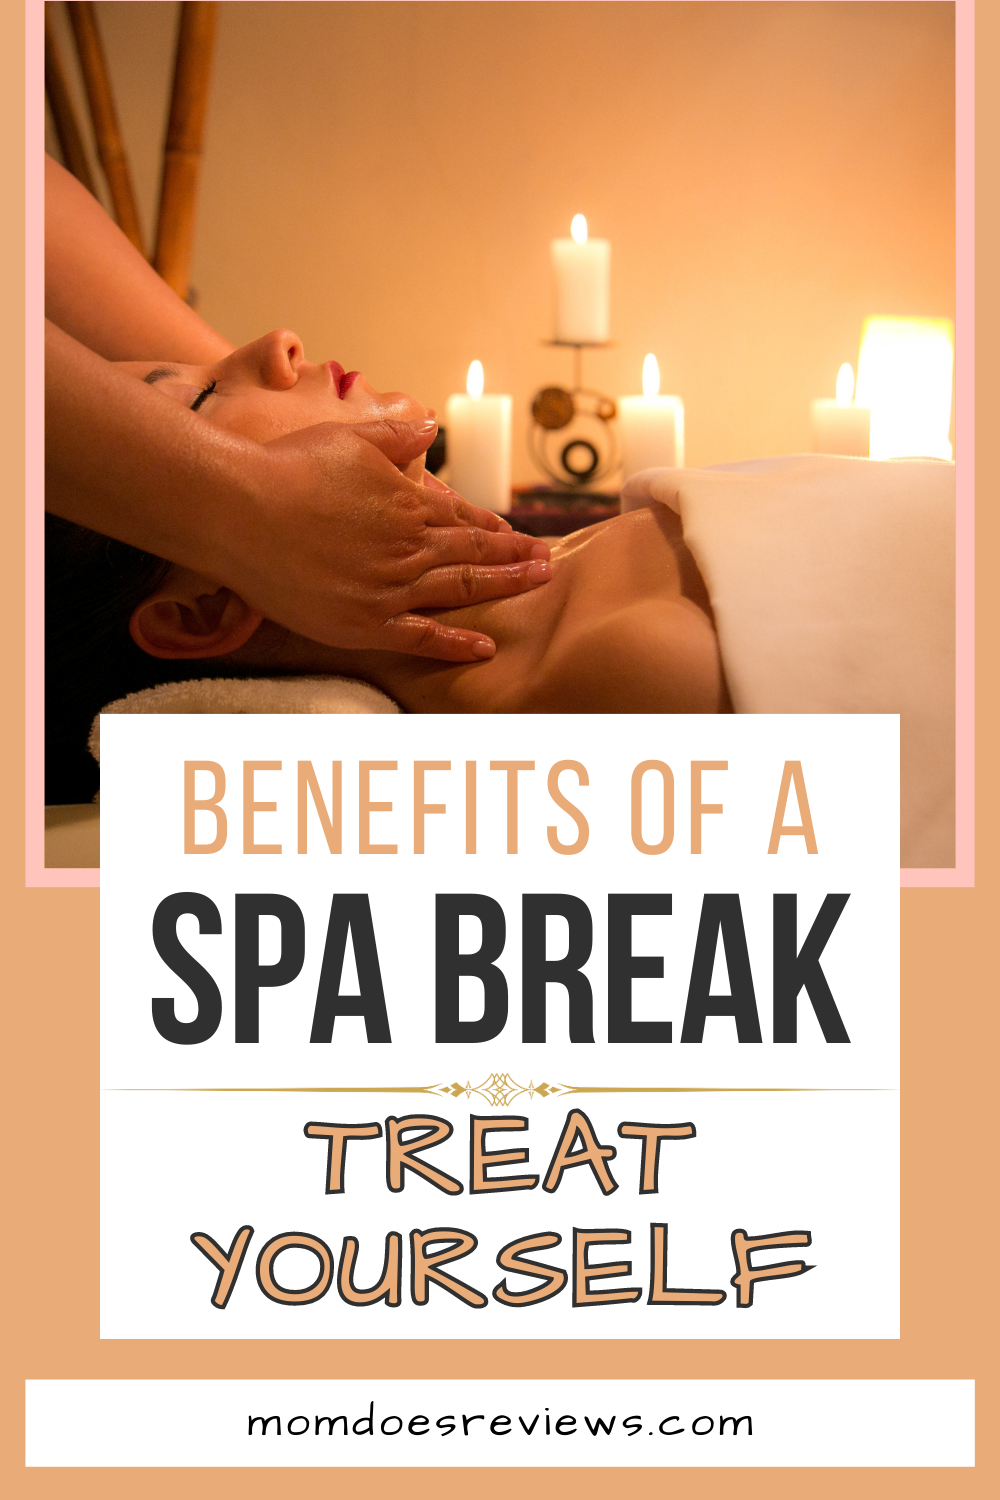 Why Treat Yourself to a Spa Break? The Benefits